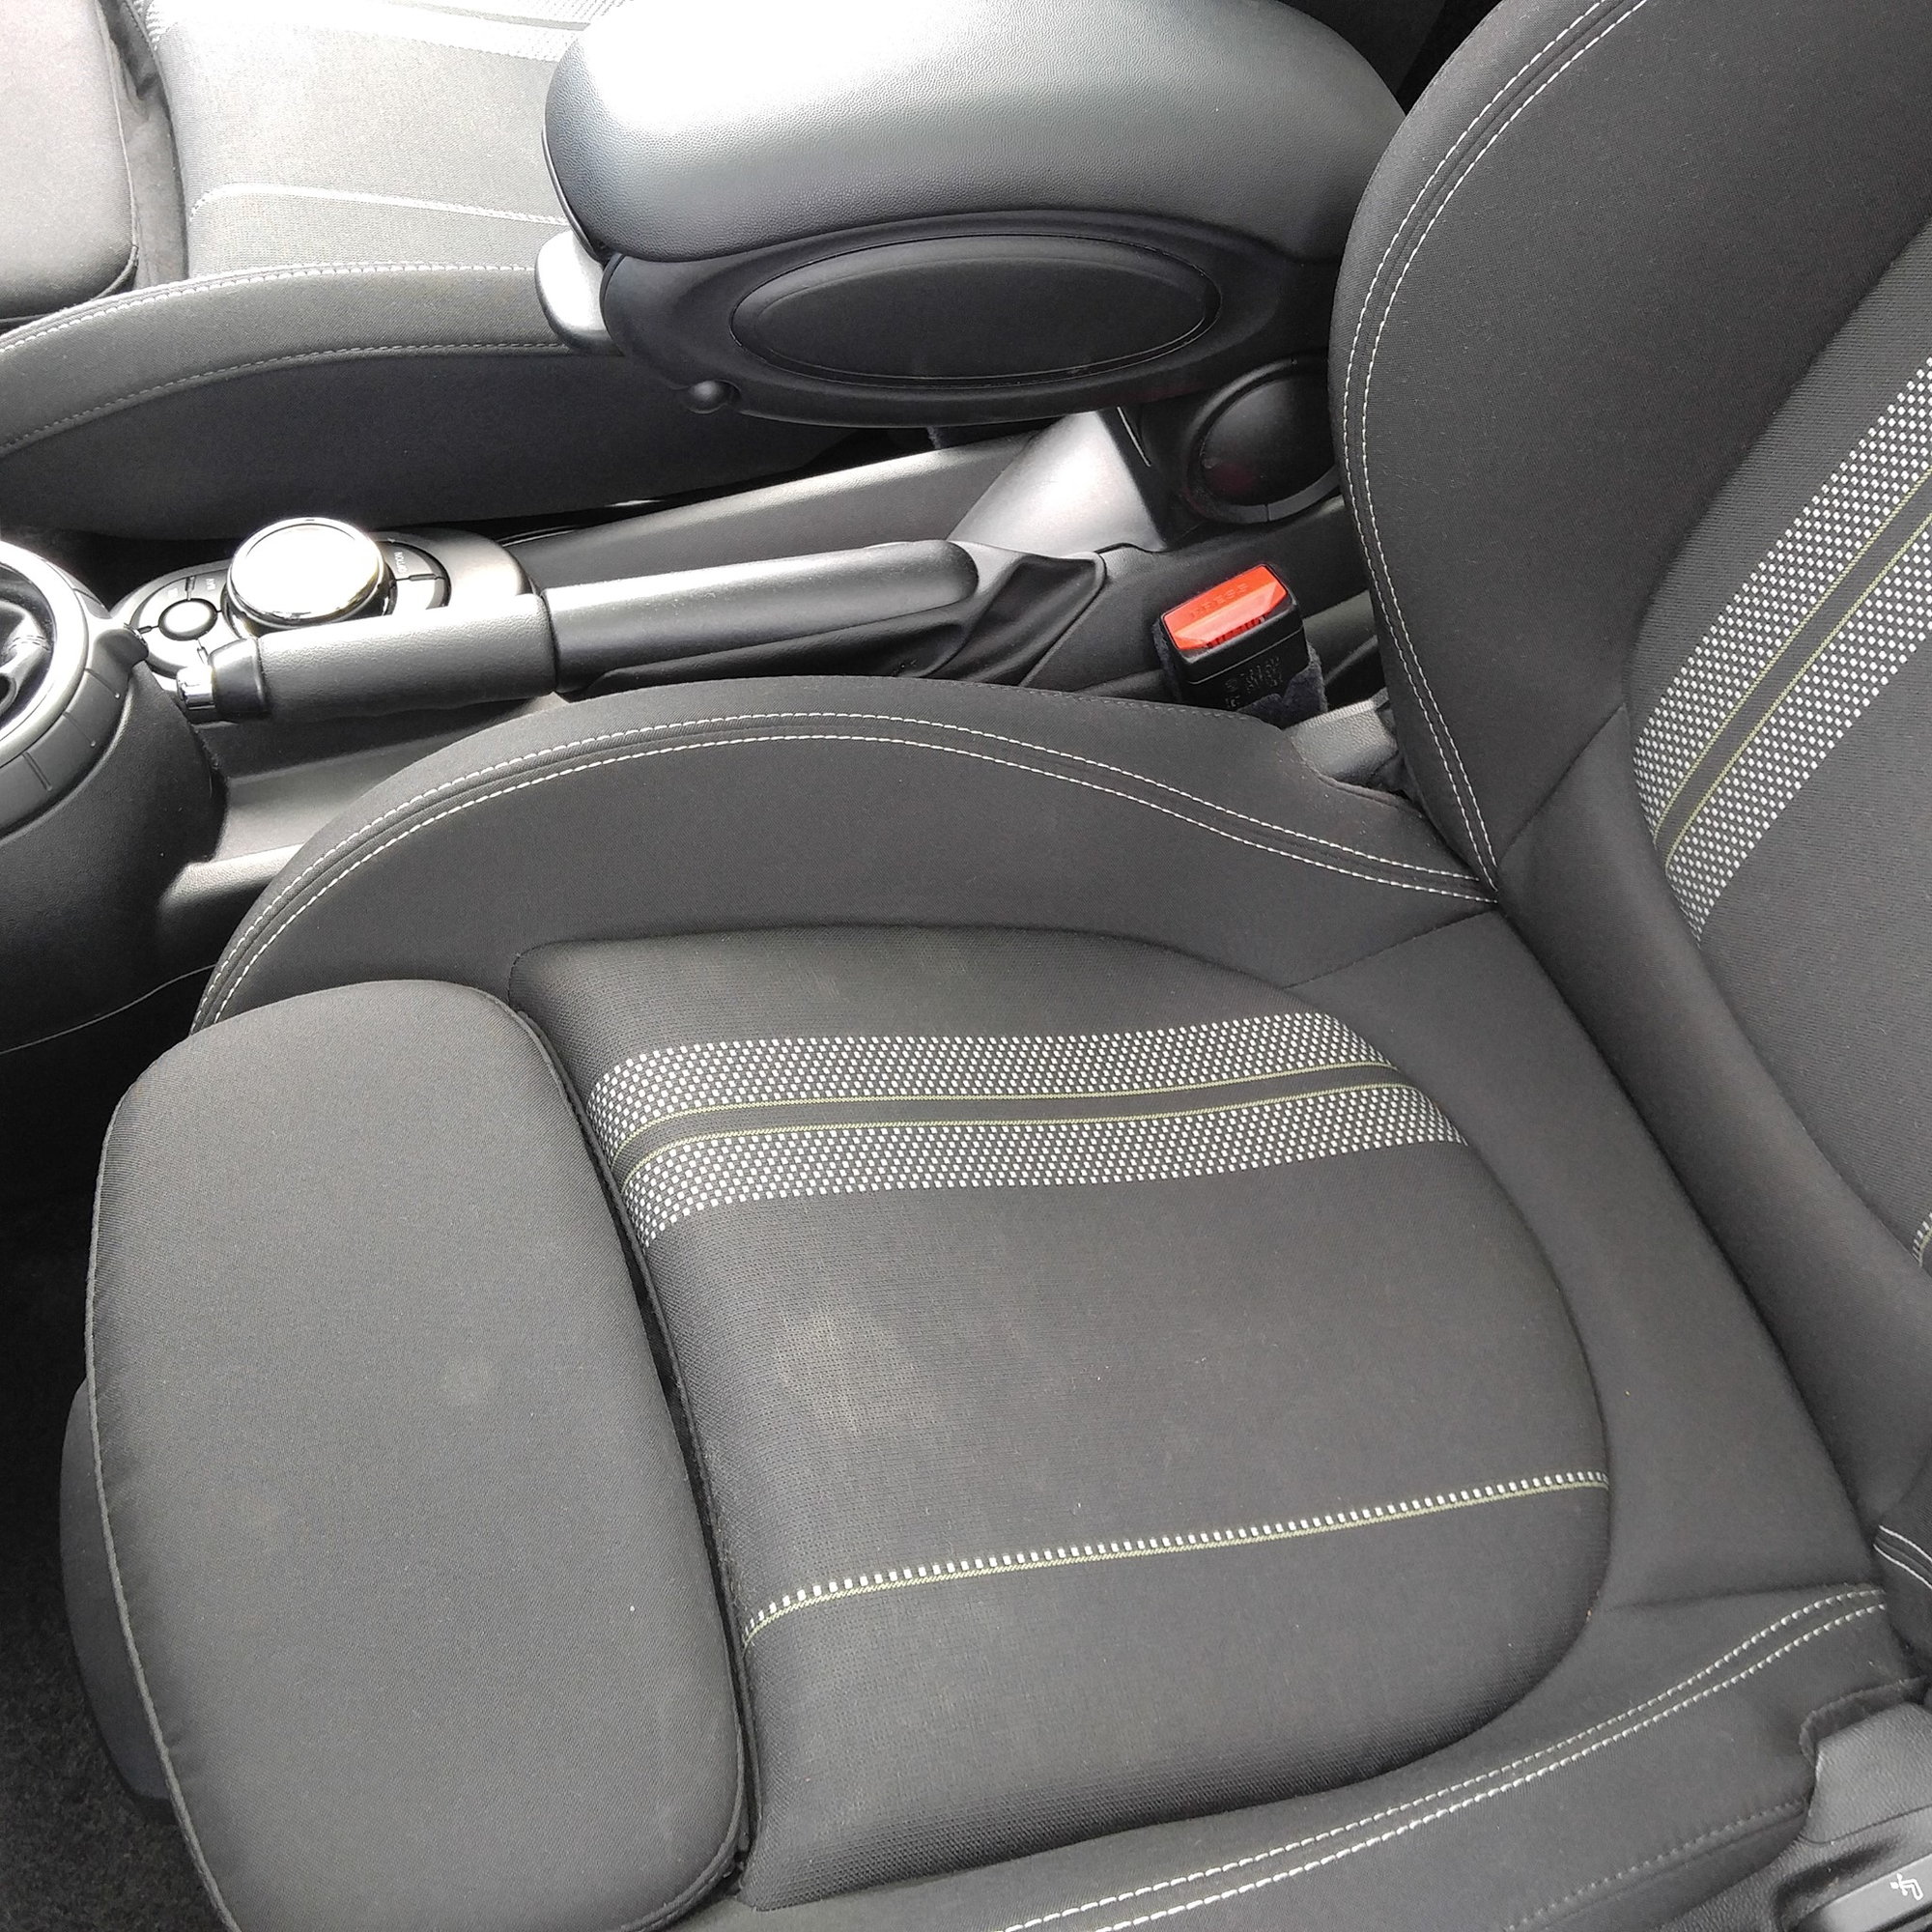 Great leather seat covers - Mini Cooper Forums - Mini Cooper Enthusiast